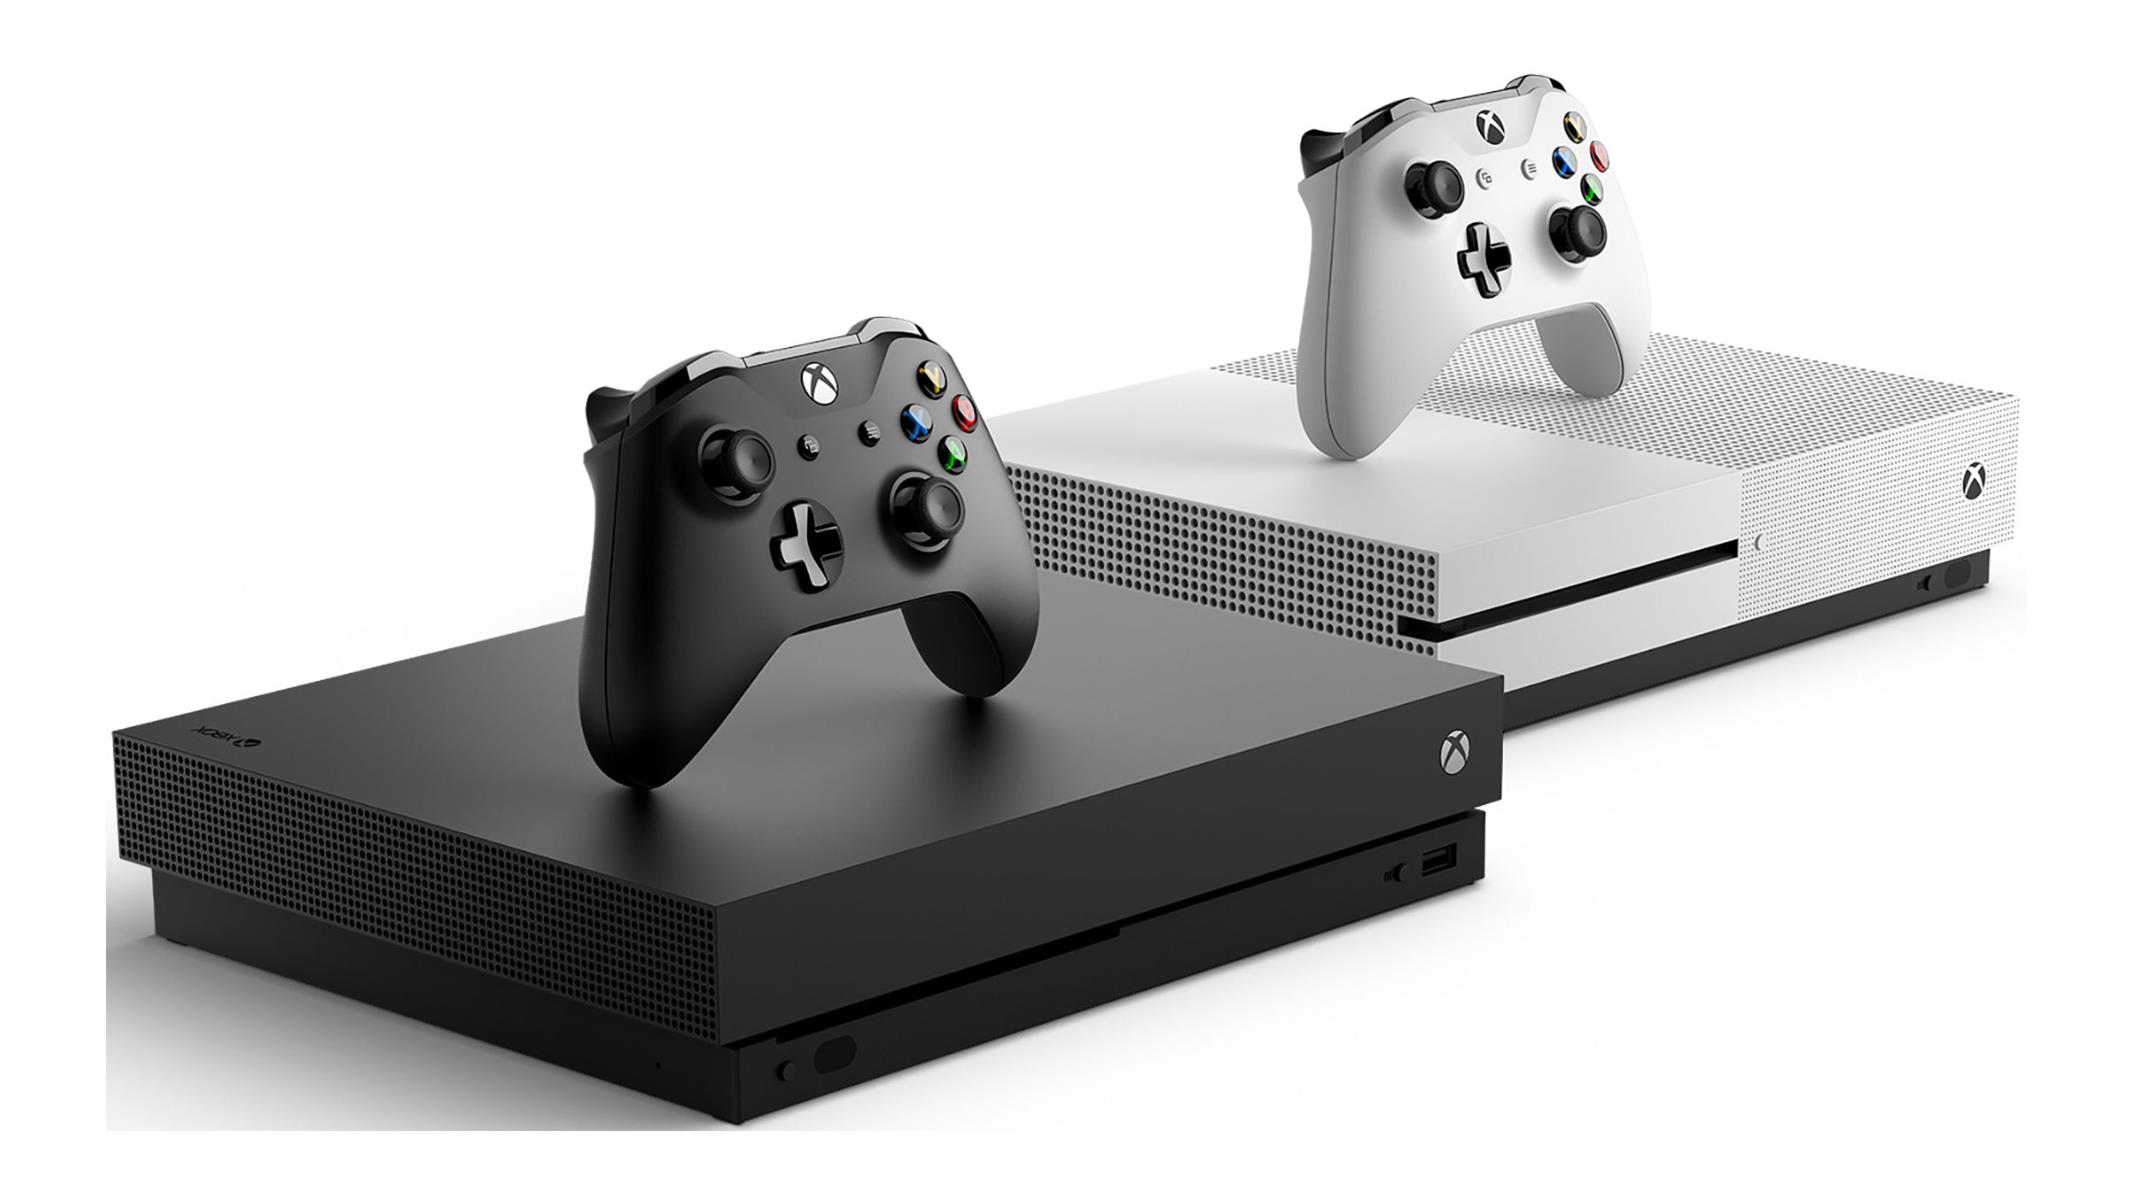 Xbox Cloud Gaming is coming to next-gen and last-gen consoles this